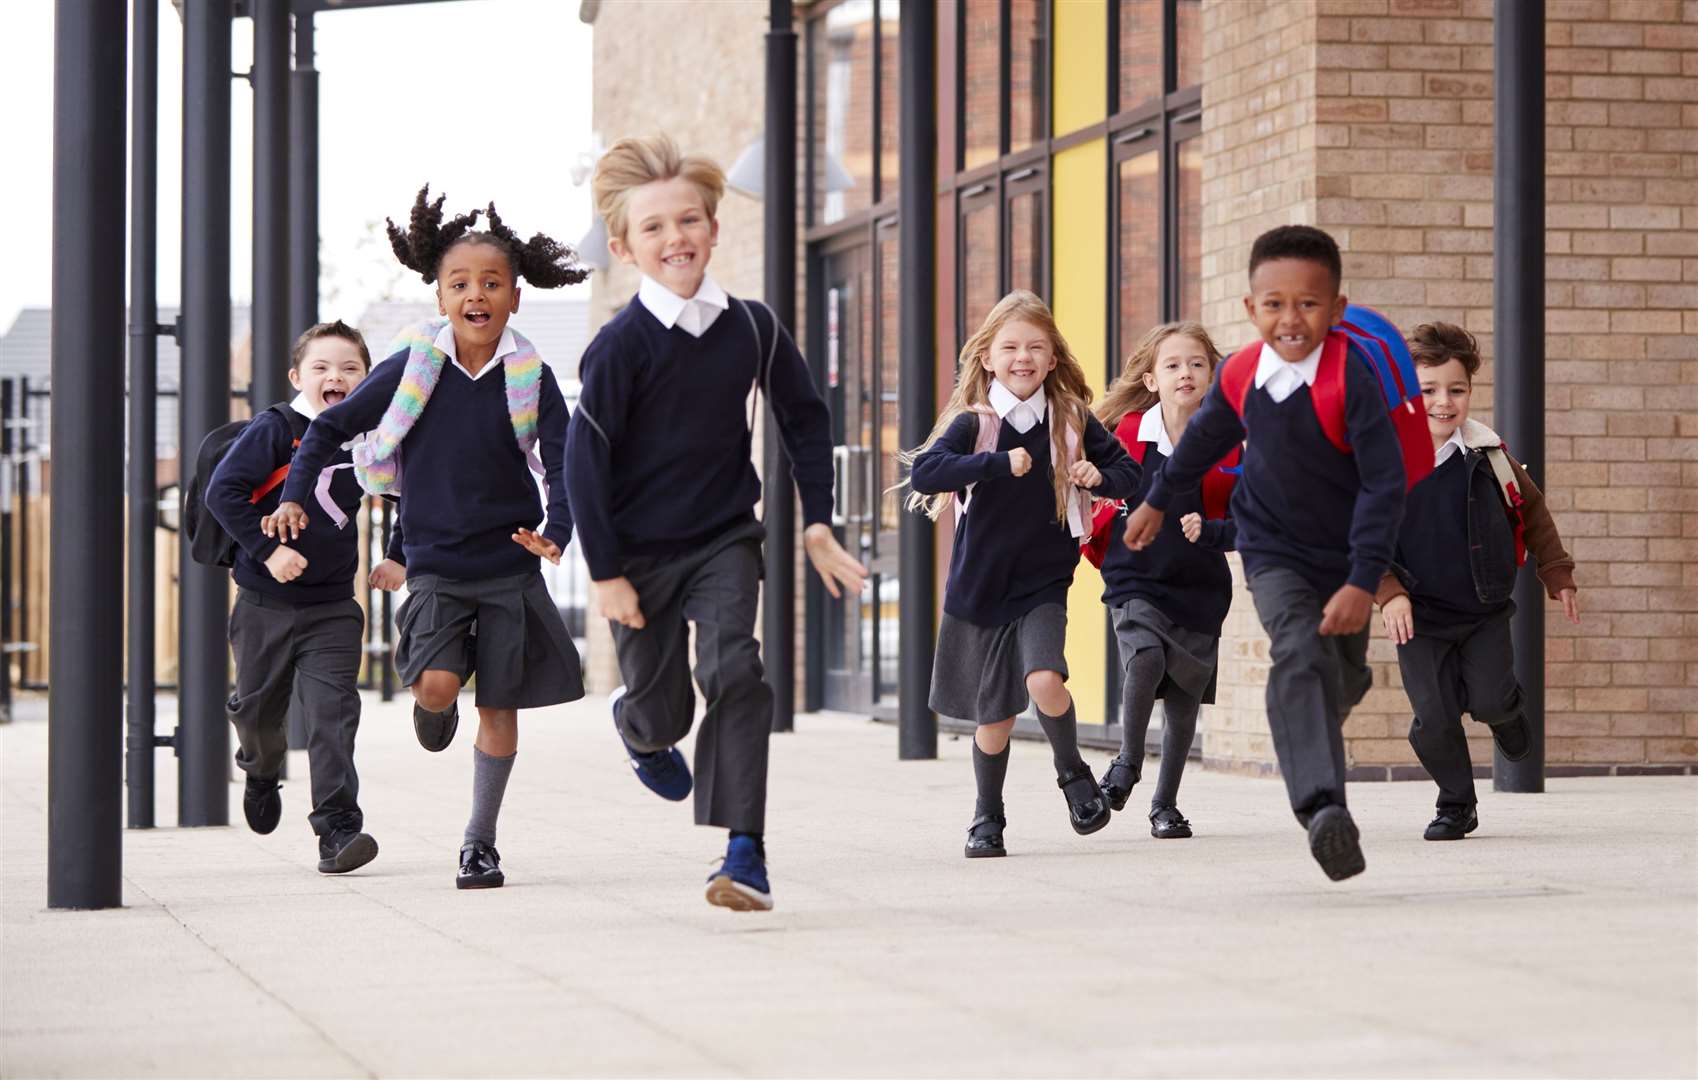 The new guidance will apply to both primary and secondary schools